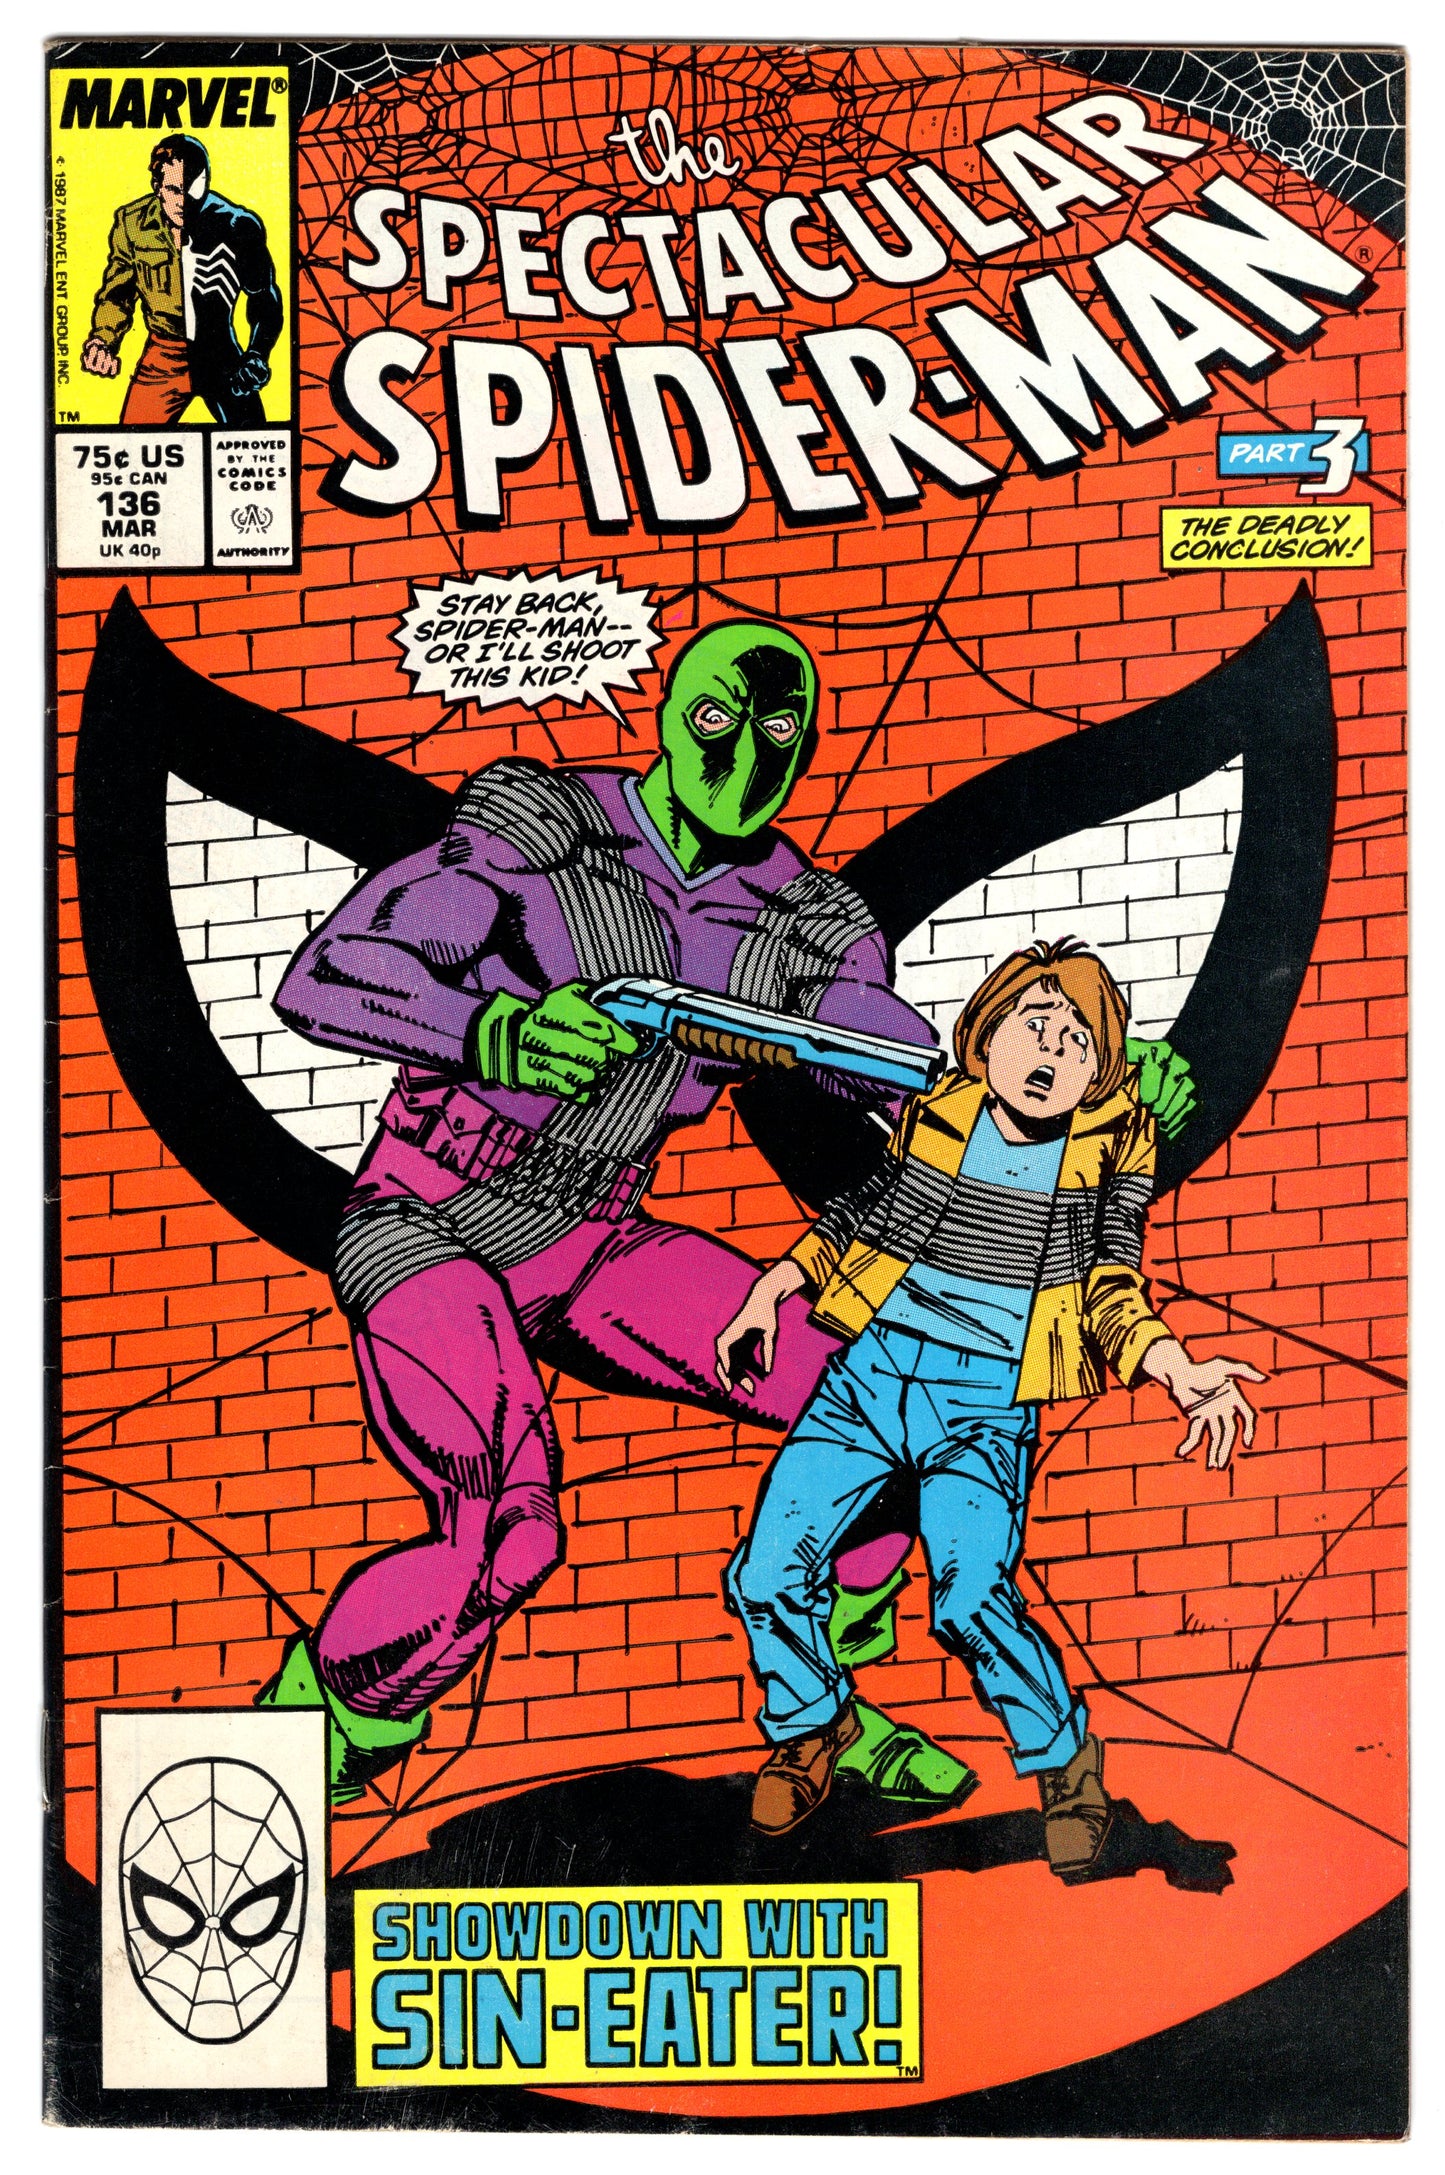 The Spectacular Spider-Man Issue #136 (March, 1988 - Marvel) VG-FN